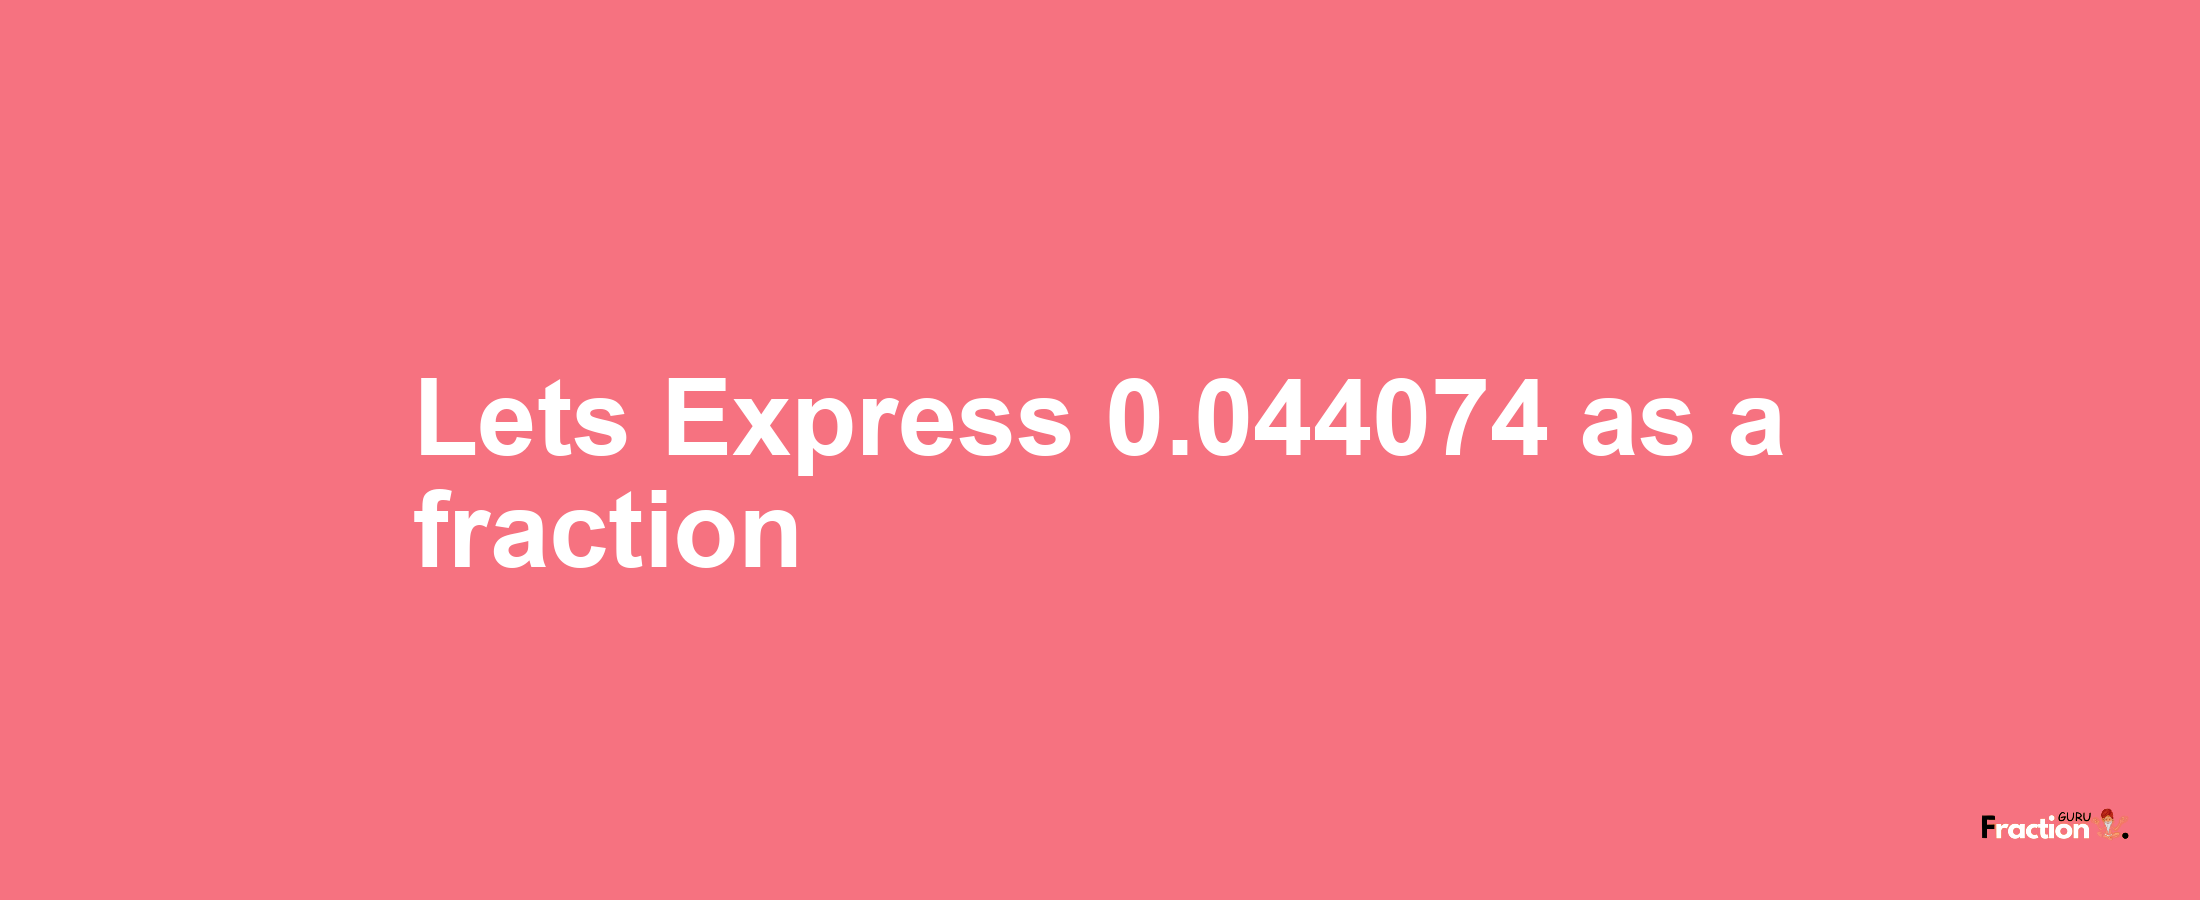 Lets Express 0.044074 as afraction